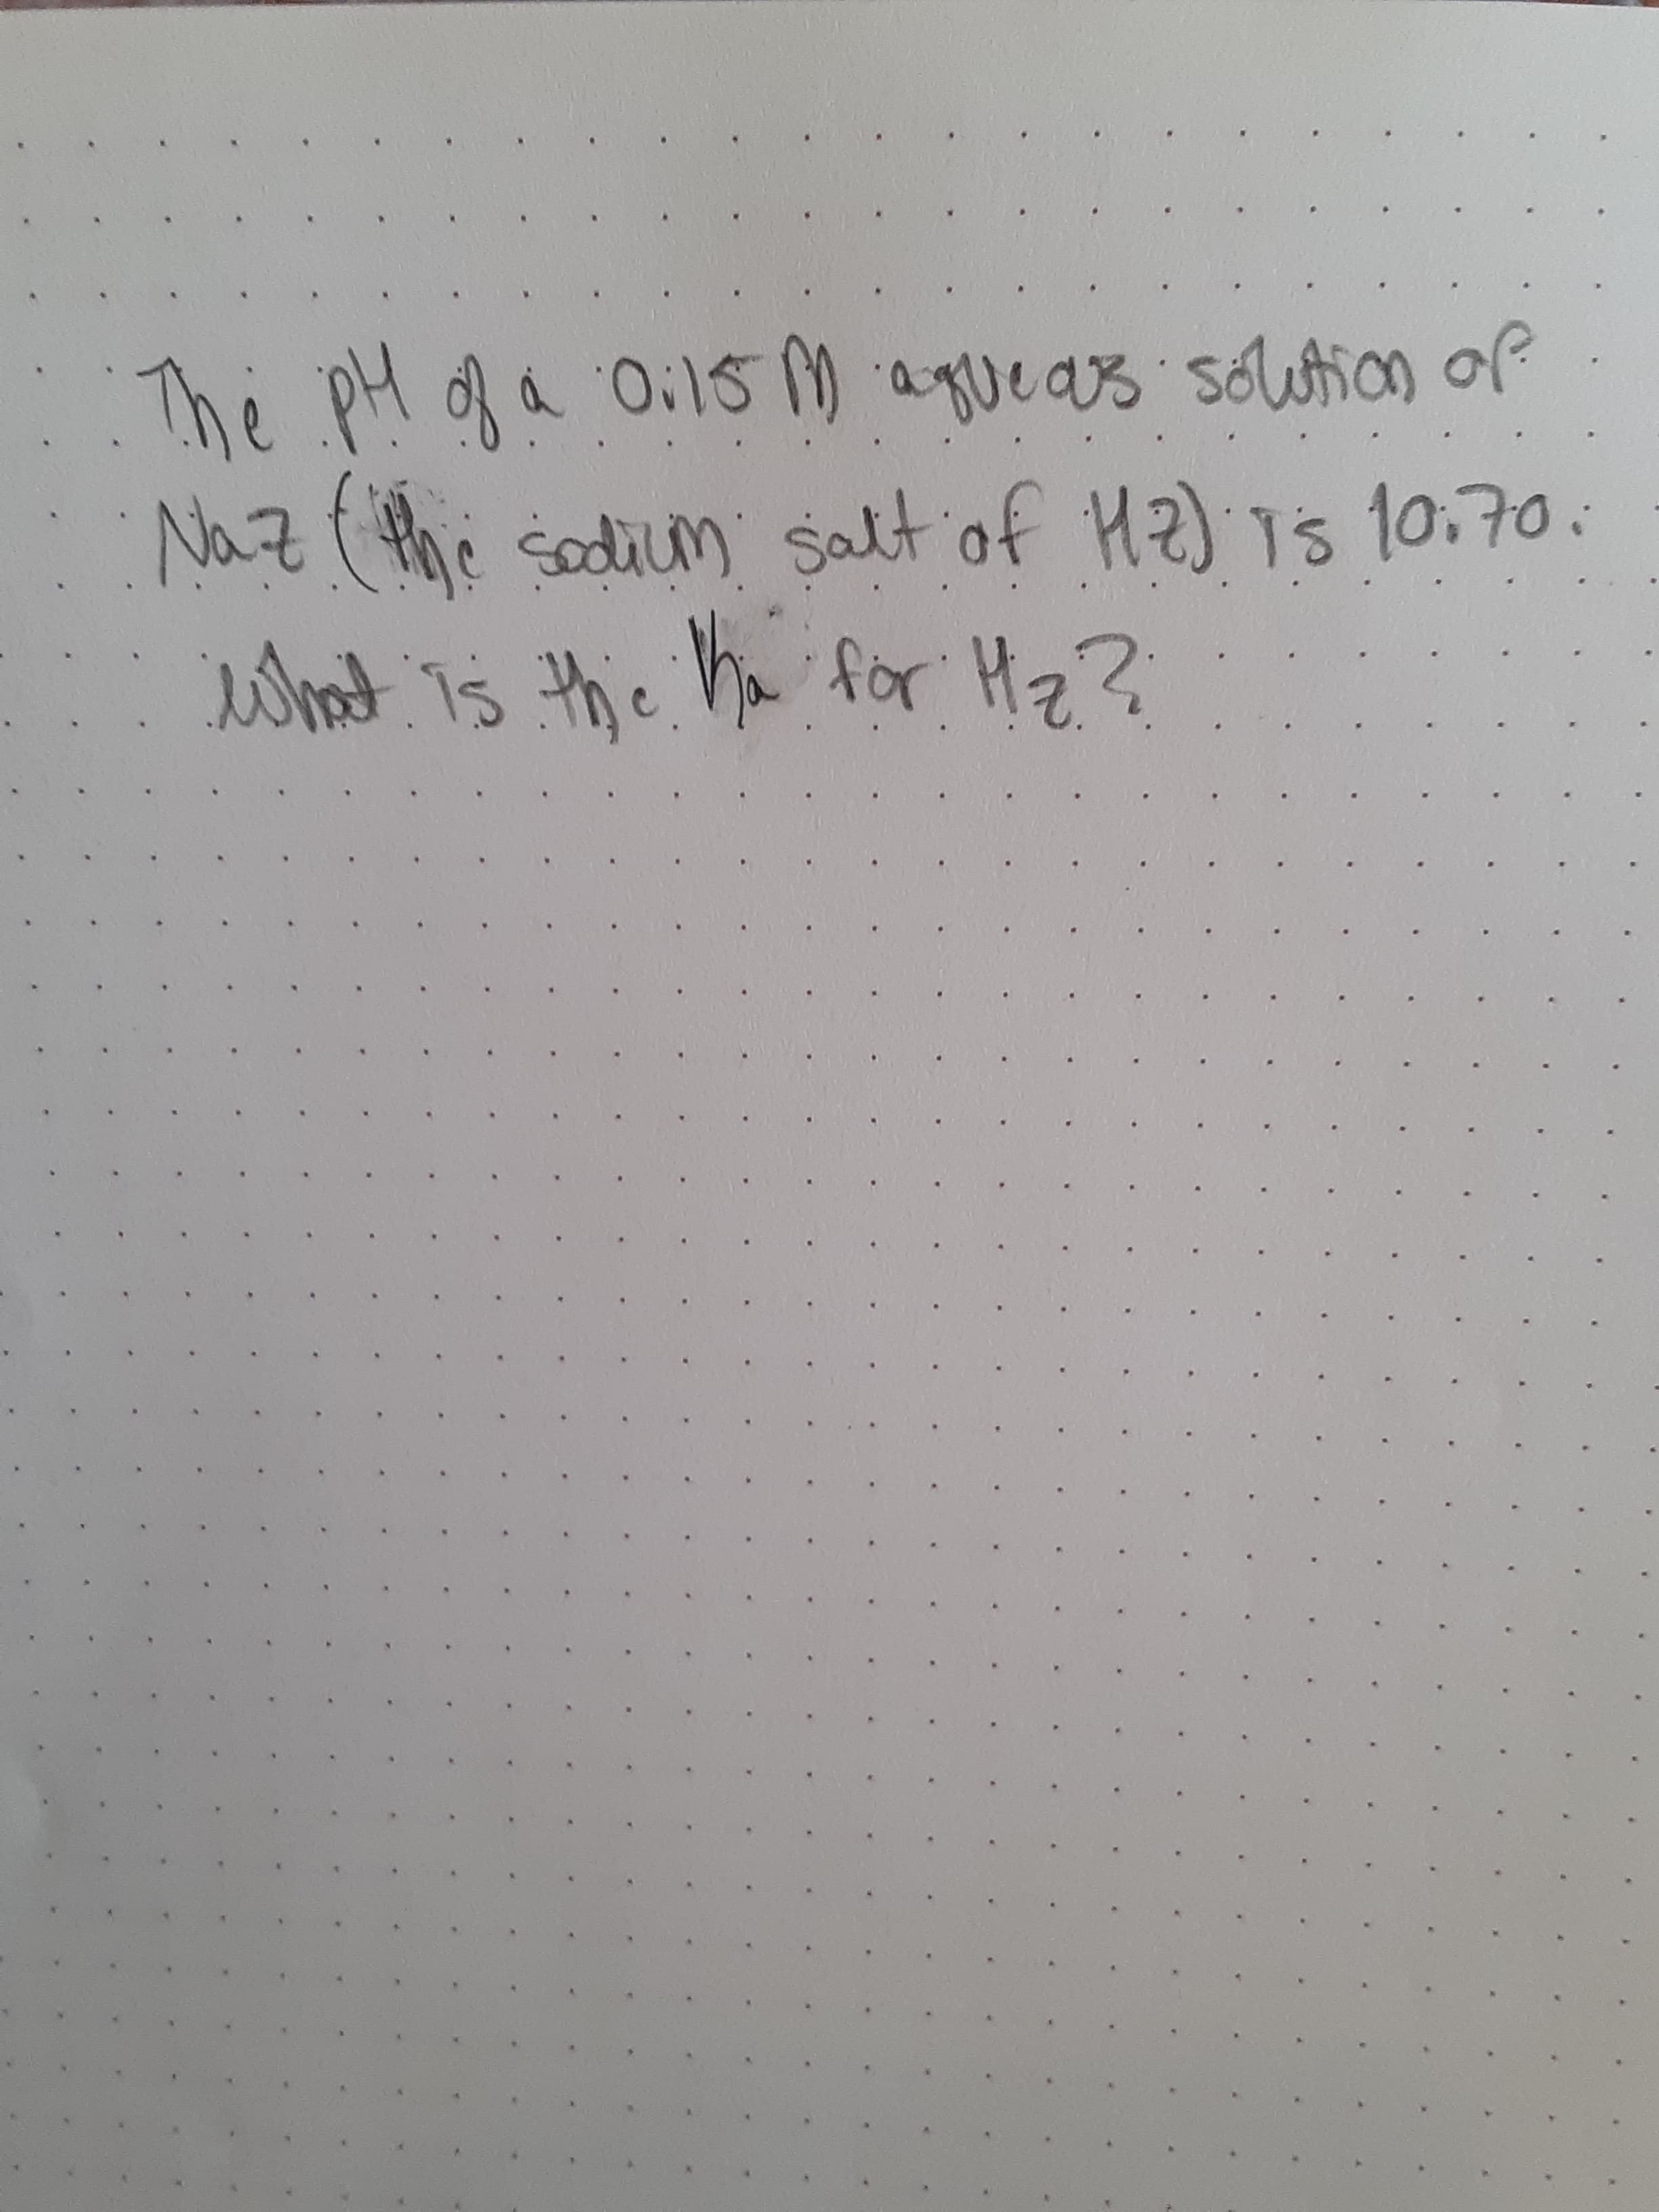 The PH of a Oil M agueas sólutiom of
Naz( the
sodium salt of 2s 10,70:
what is thie ha for Hz?
